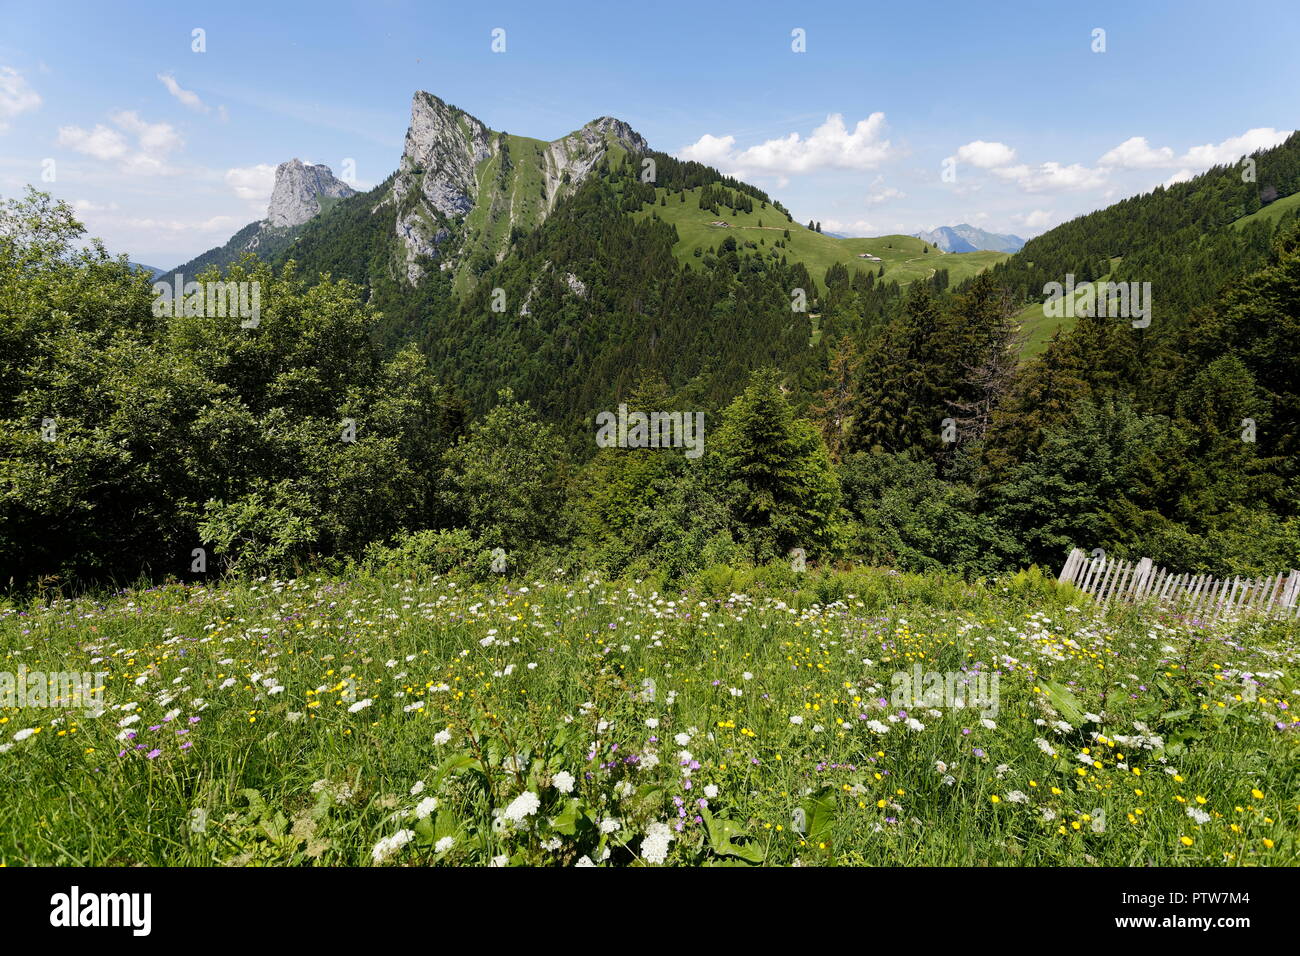 Meadow flowers in the foerground with wooden fence on the hills around Col de la Forclaz France Stock Photo